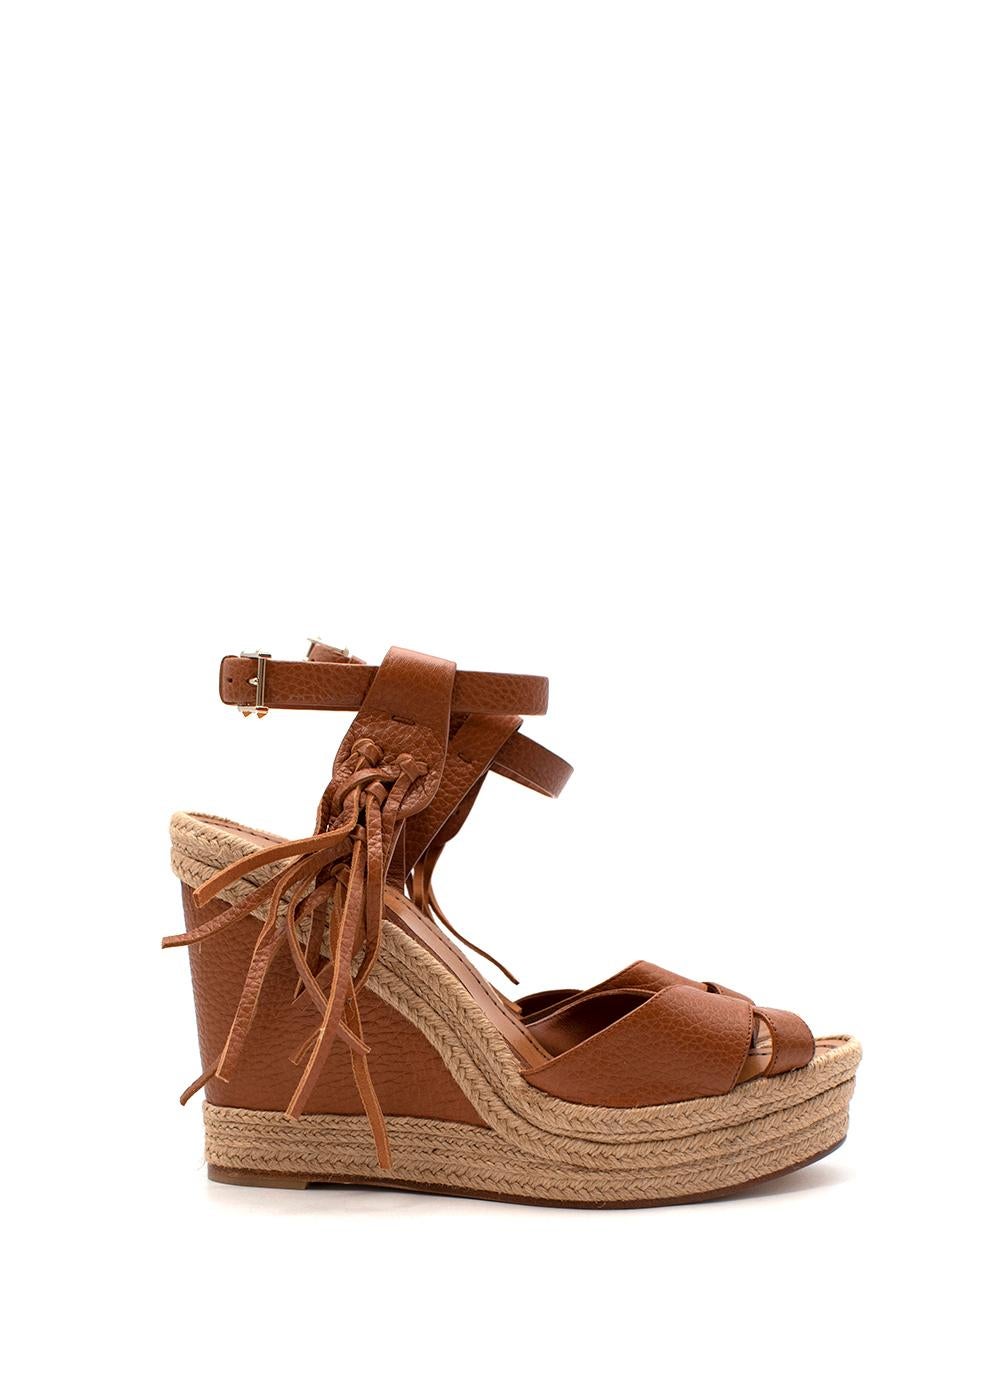 Brown Tan Leather & Jute Wedge Heeled Espadrille Sandals For Sale